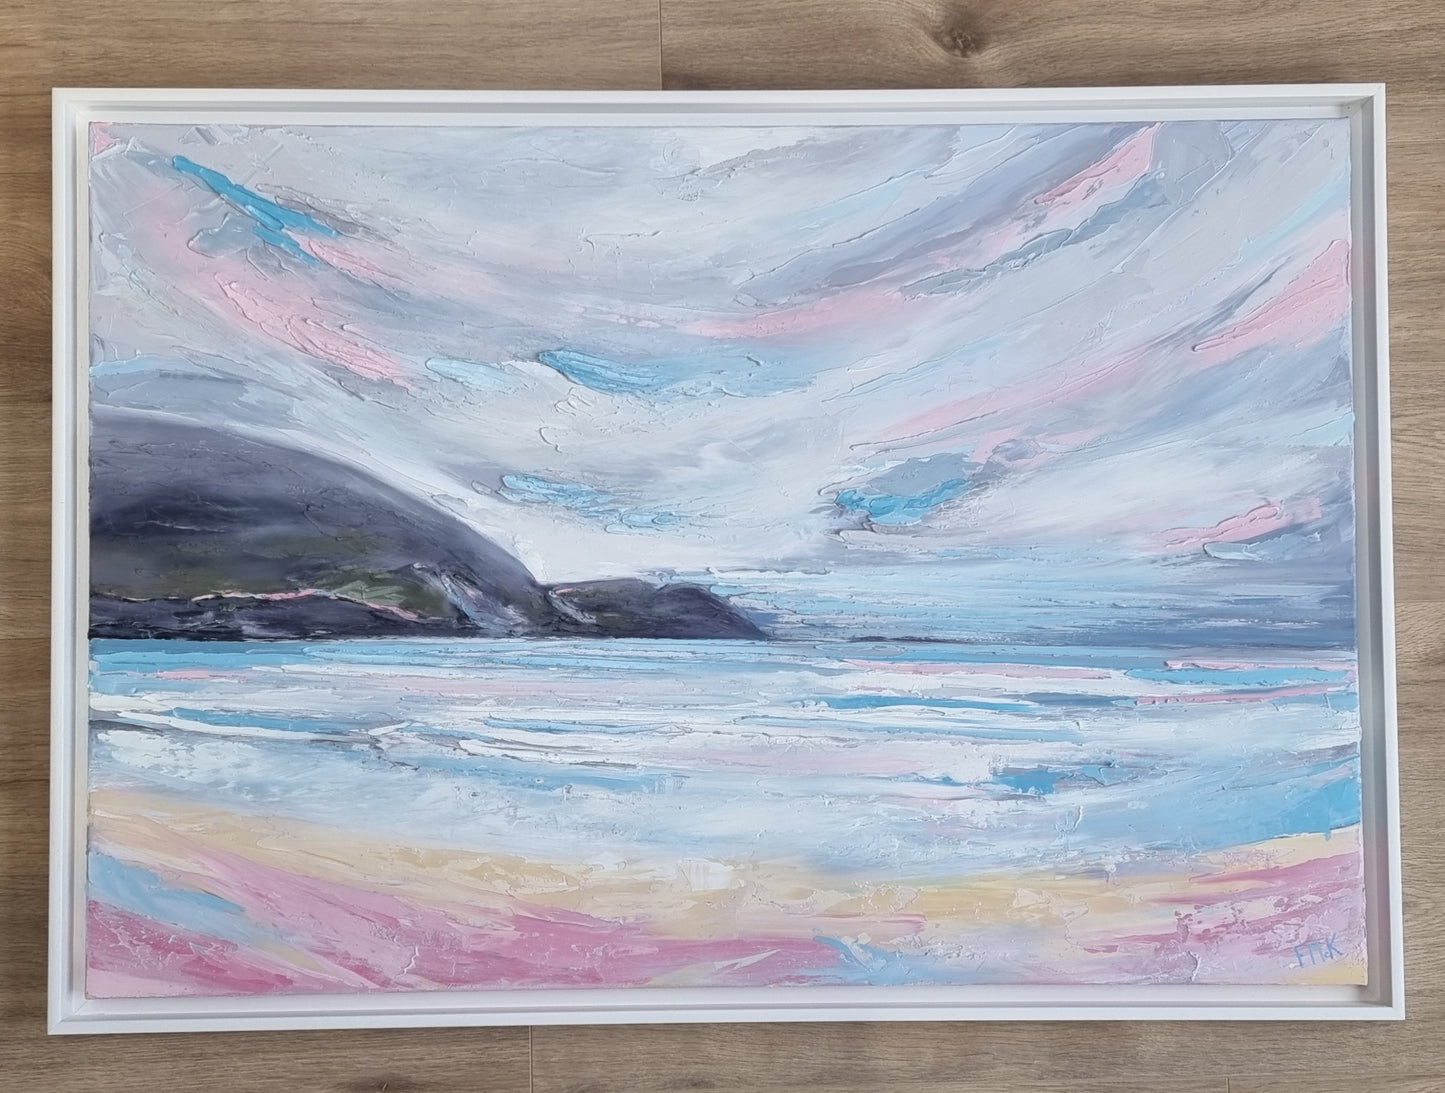 An original oil painting of Keel Beach, Achill Island, in Co. Mayo on The Wild Atlantic Way.